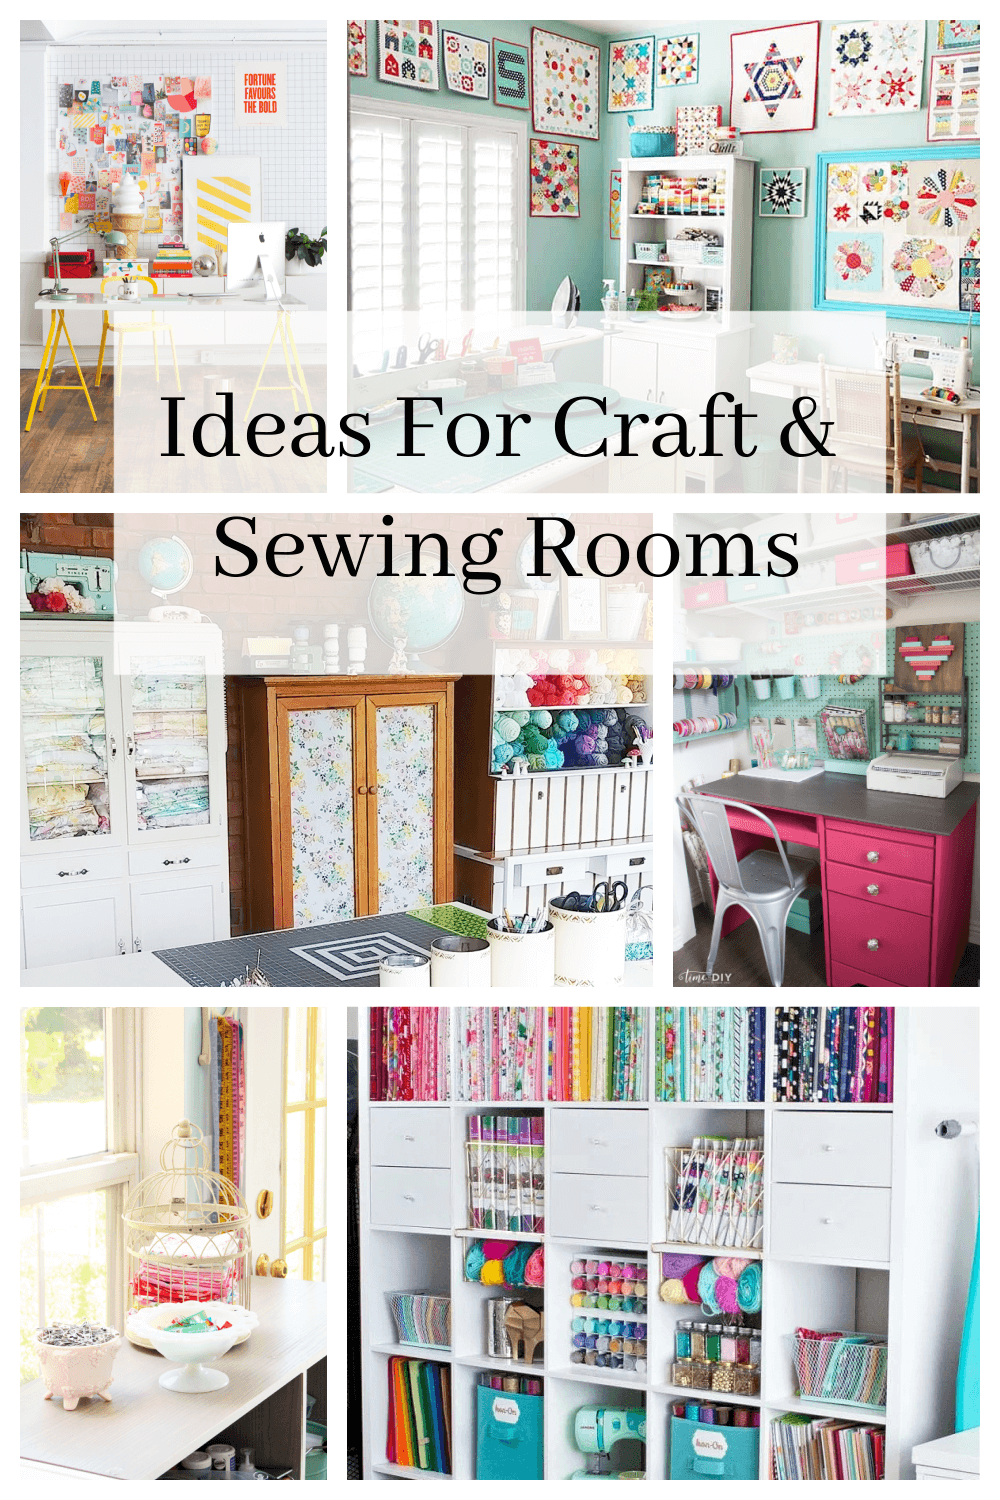 Ideas For Craft & Sewing Rooms